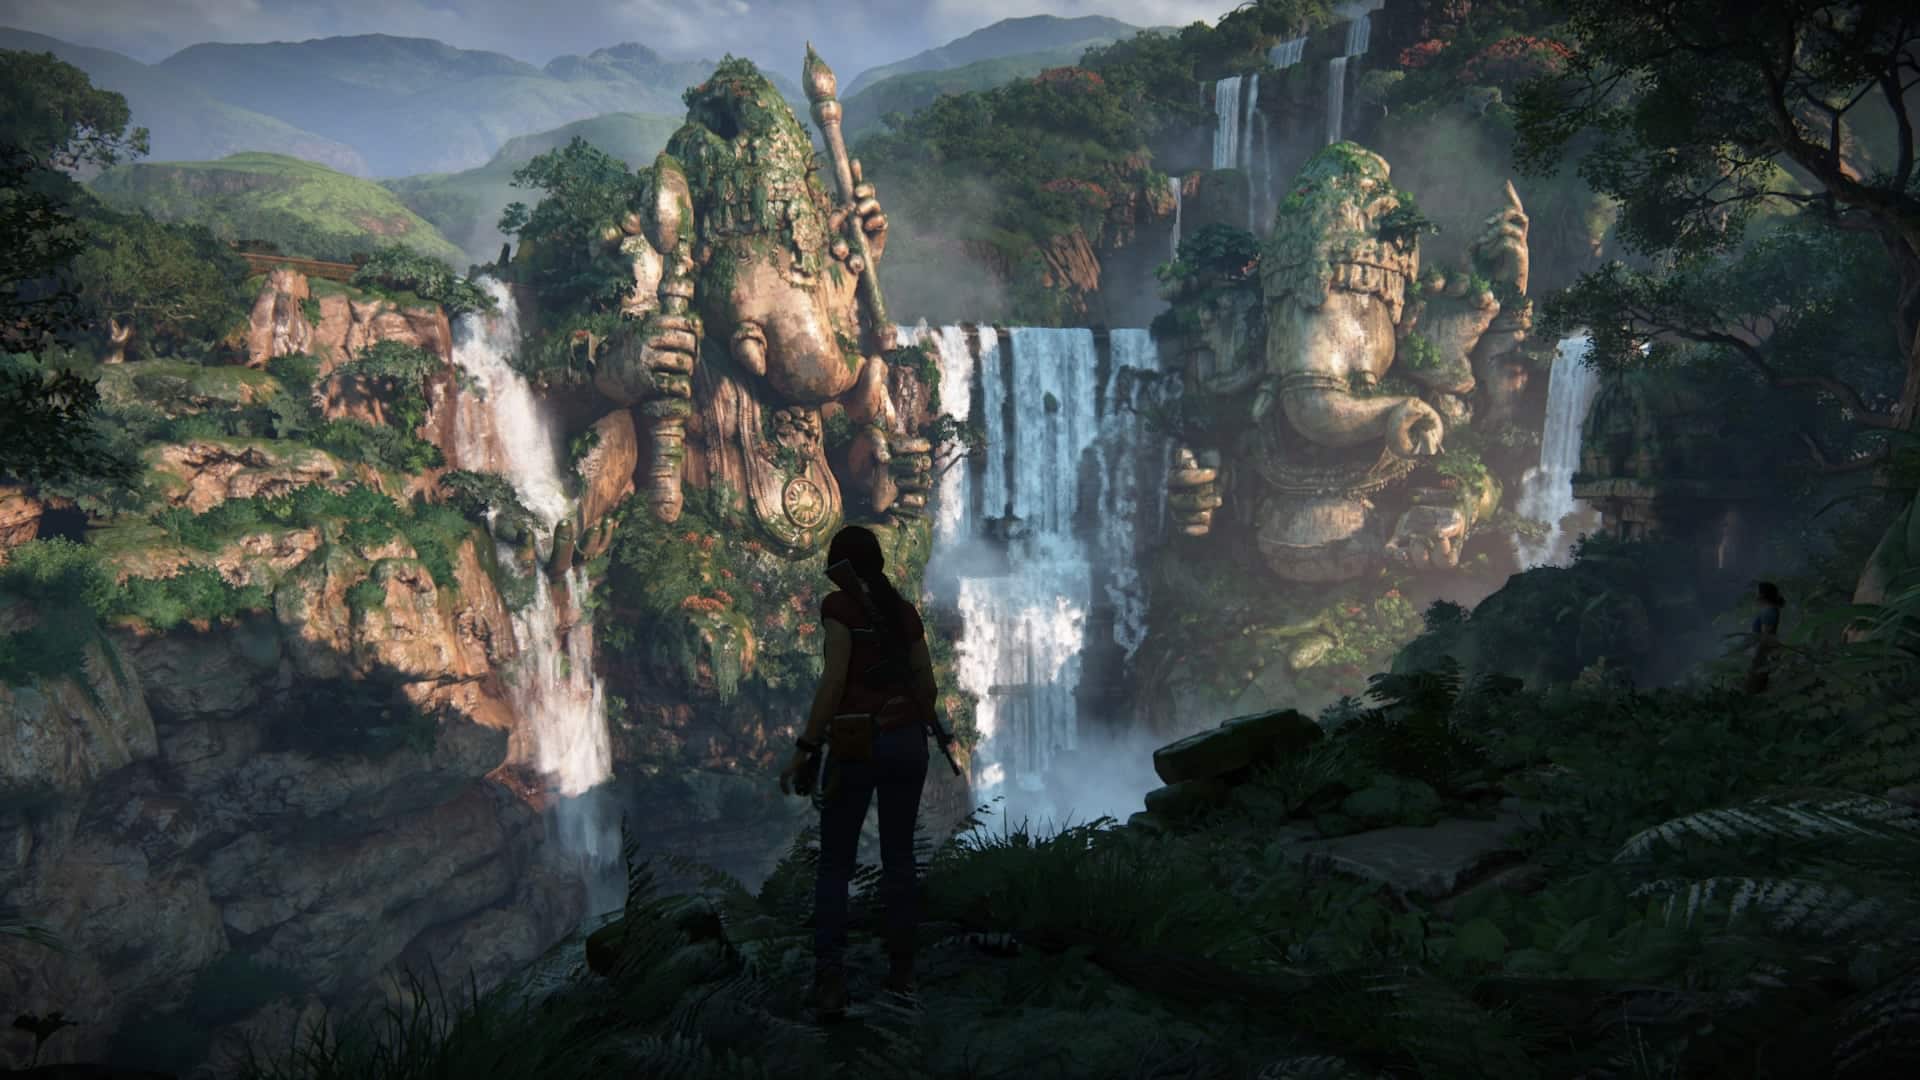 The architecture in Lost Legacy is amazing